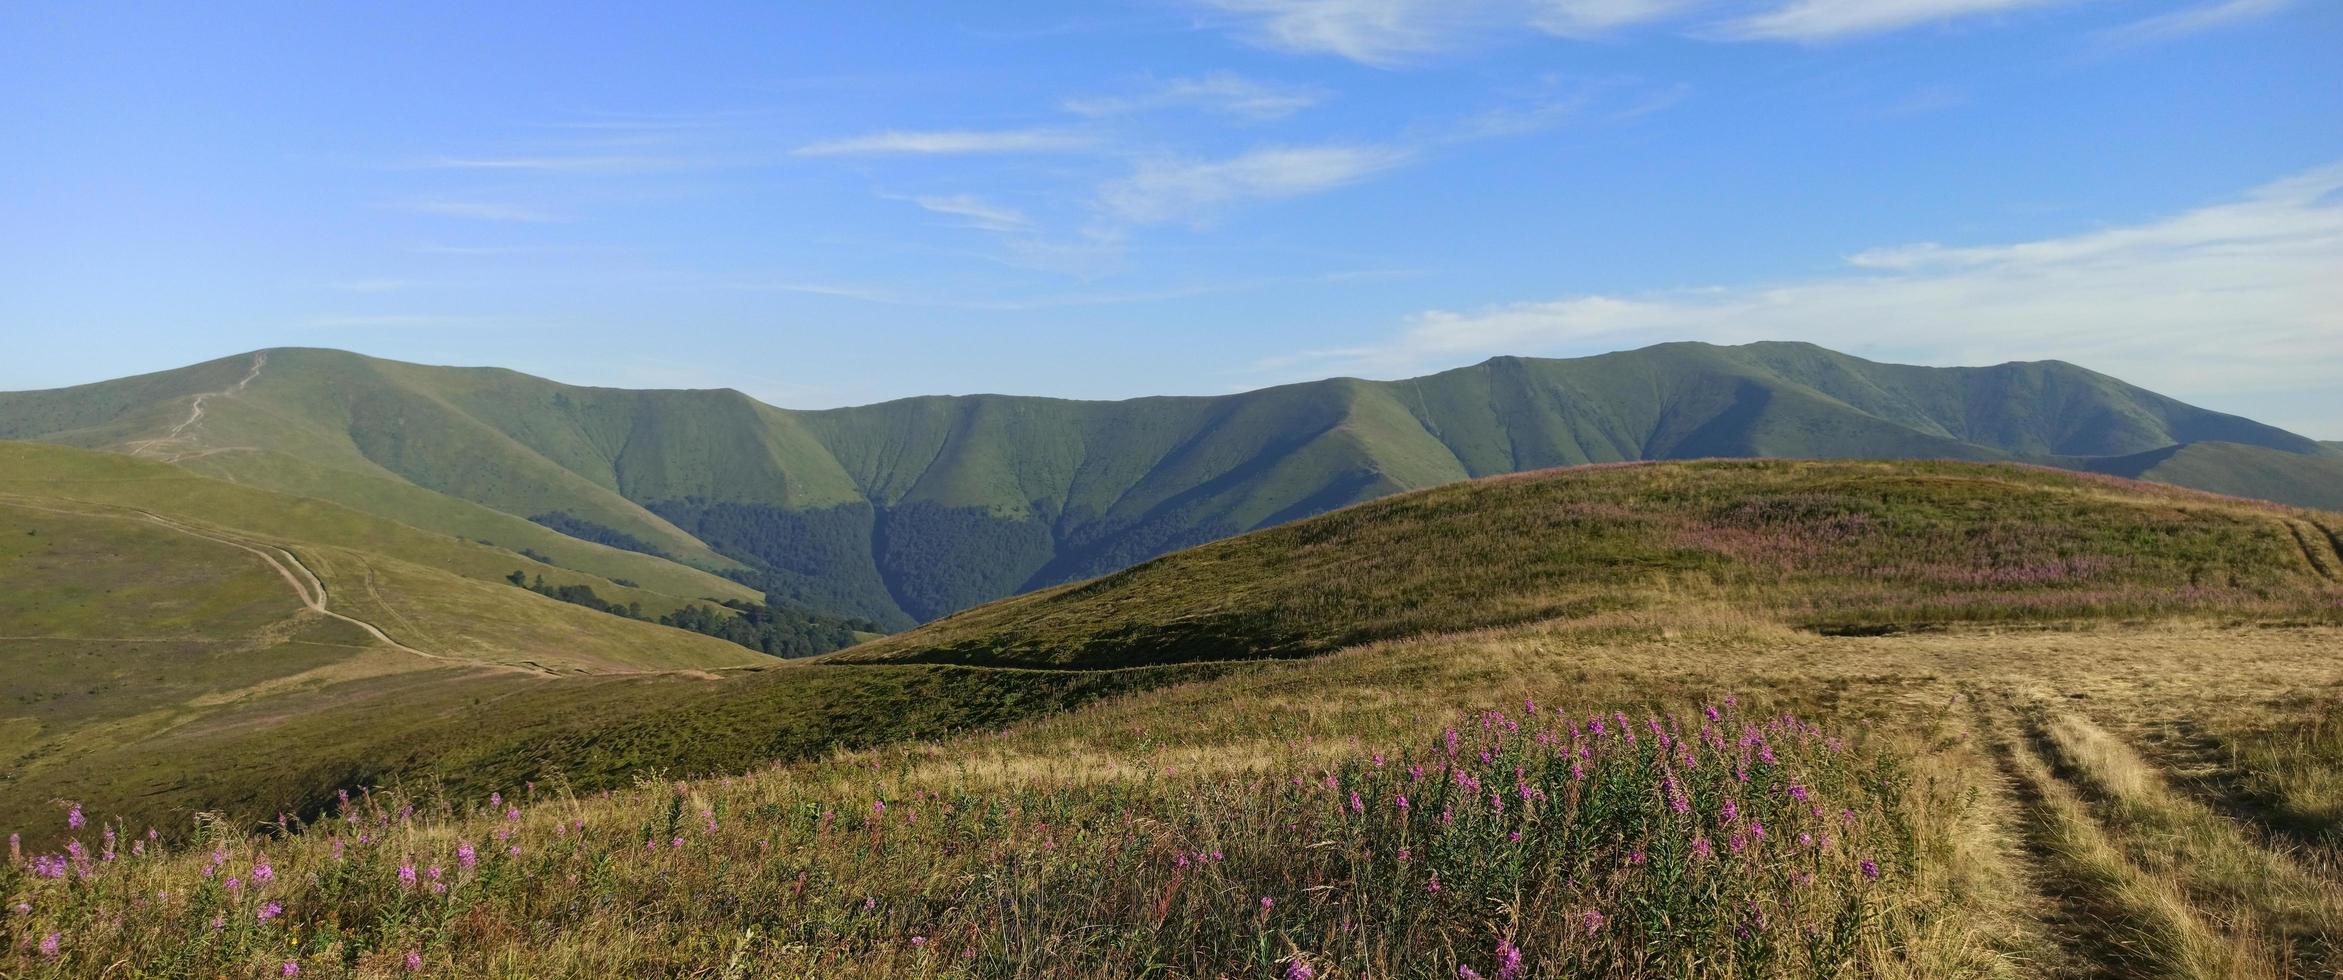 Mountain landscape. Colorful summer landscape in the Carpathian mountains. book cover. photo